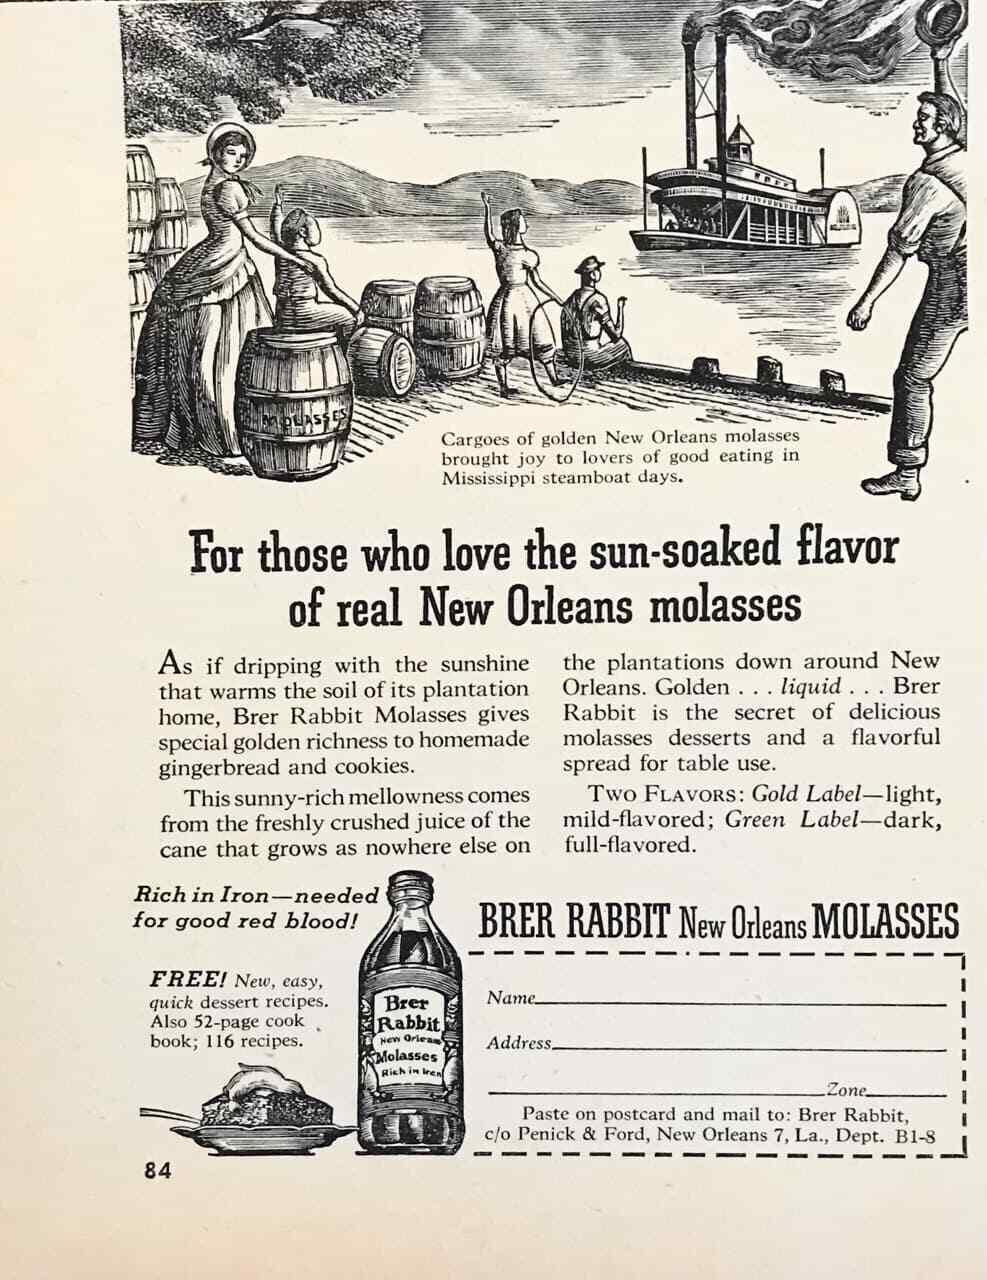 1948 Brer Rabbit New Orleans Molasses PRINT AD Sun-Soaked Flavor Steamboat Cargo